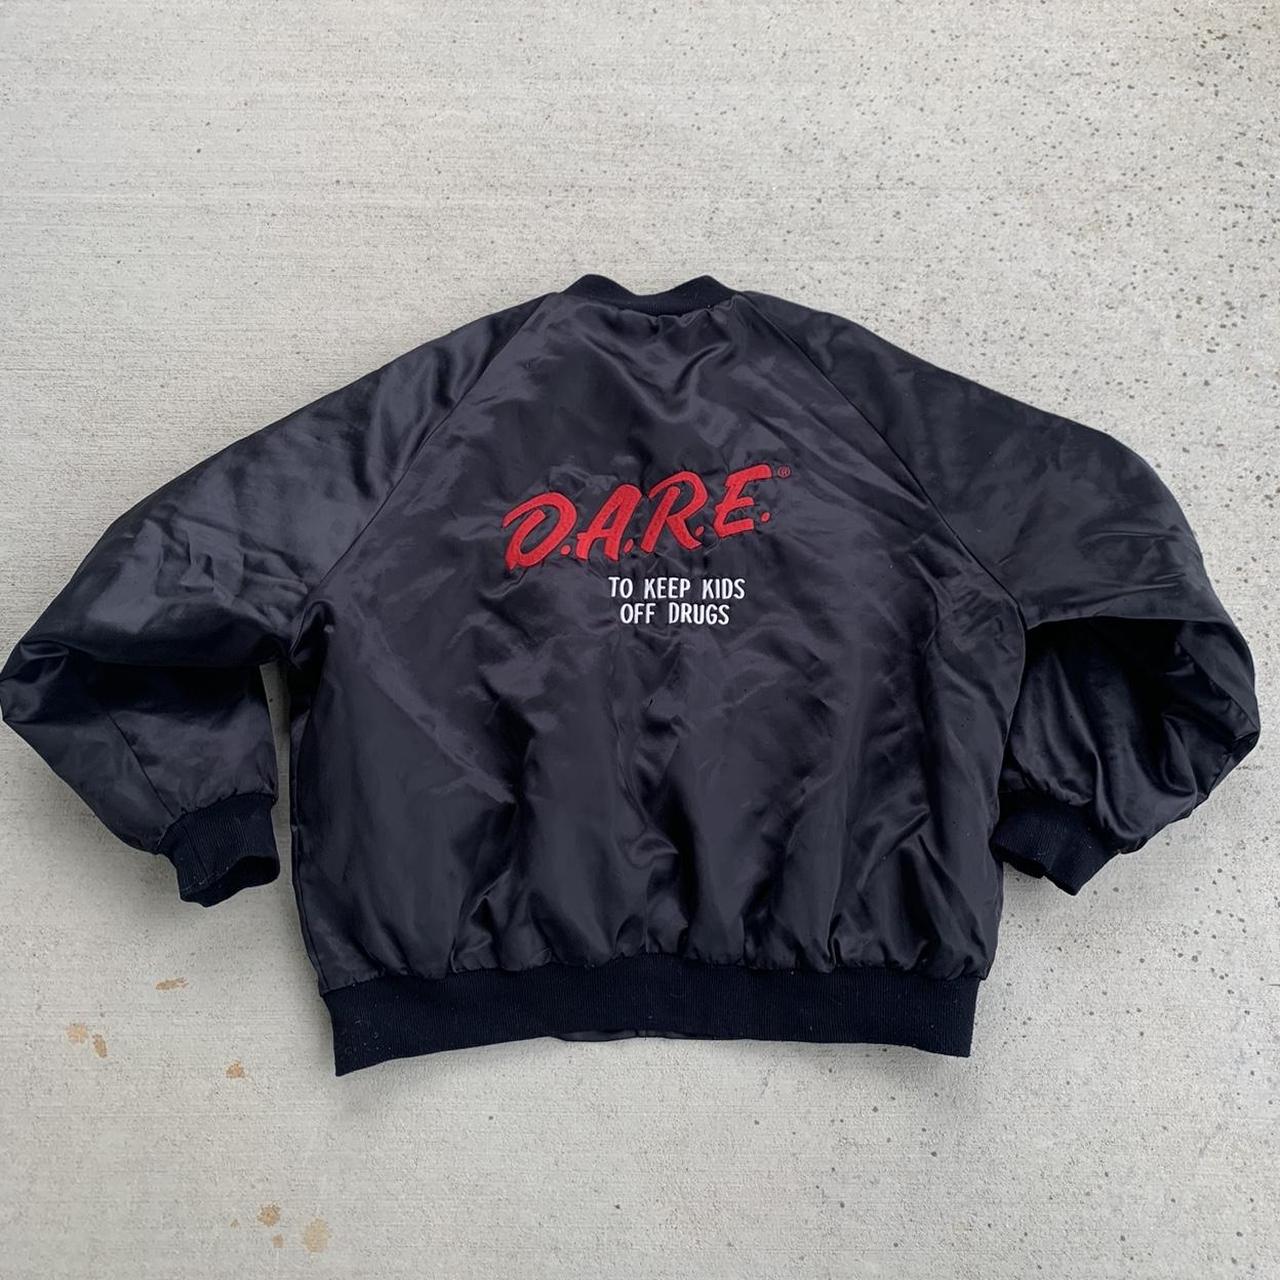 Vintage dare satin jacket Made in USA Size 3xl but... - Depop